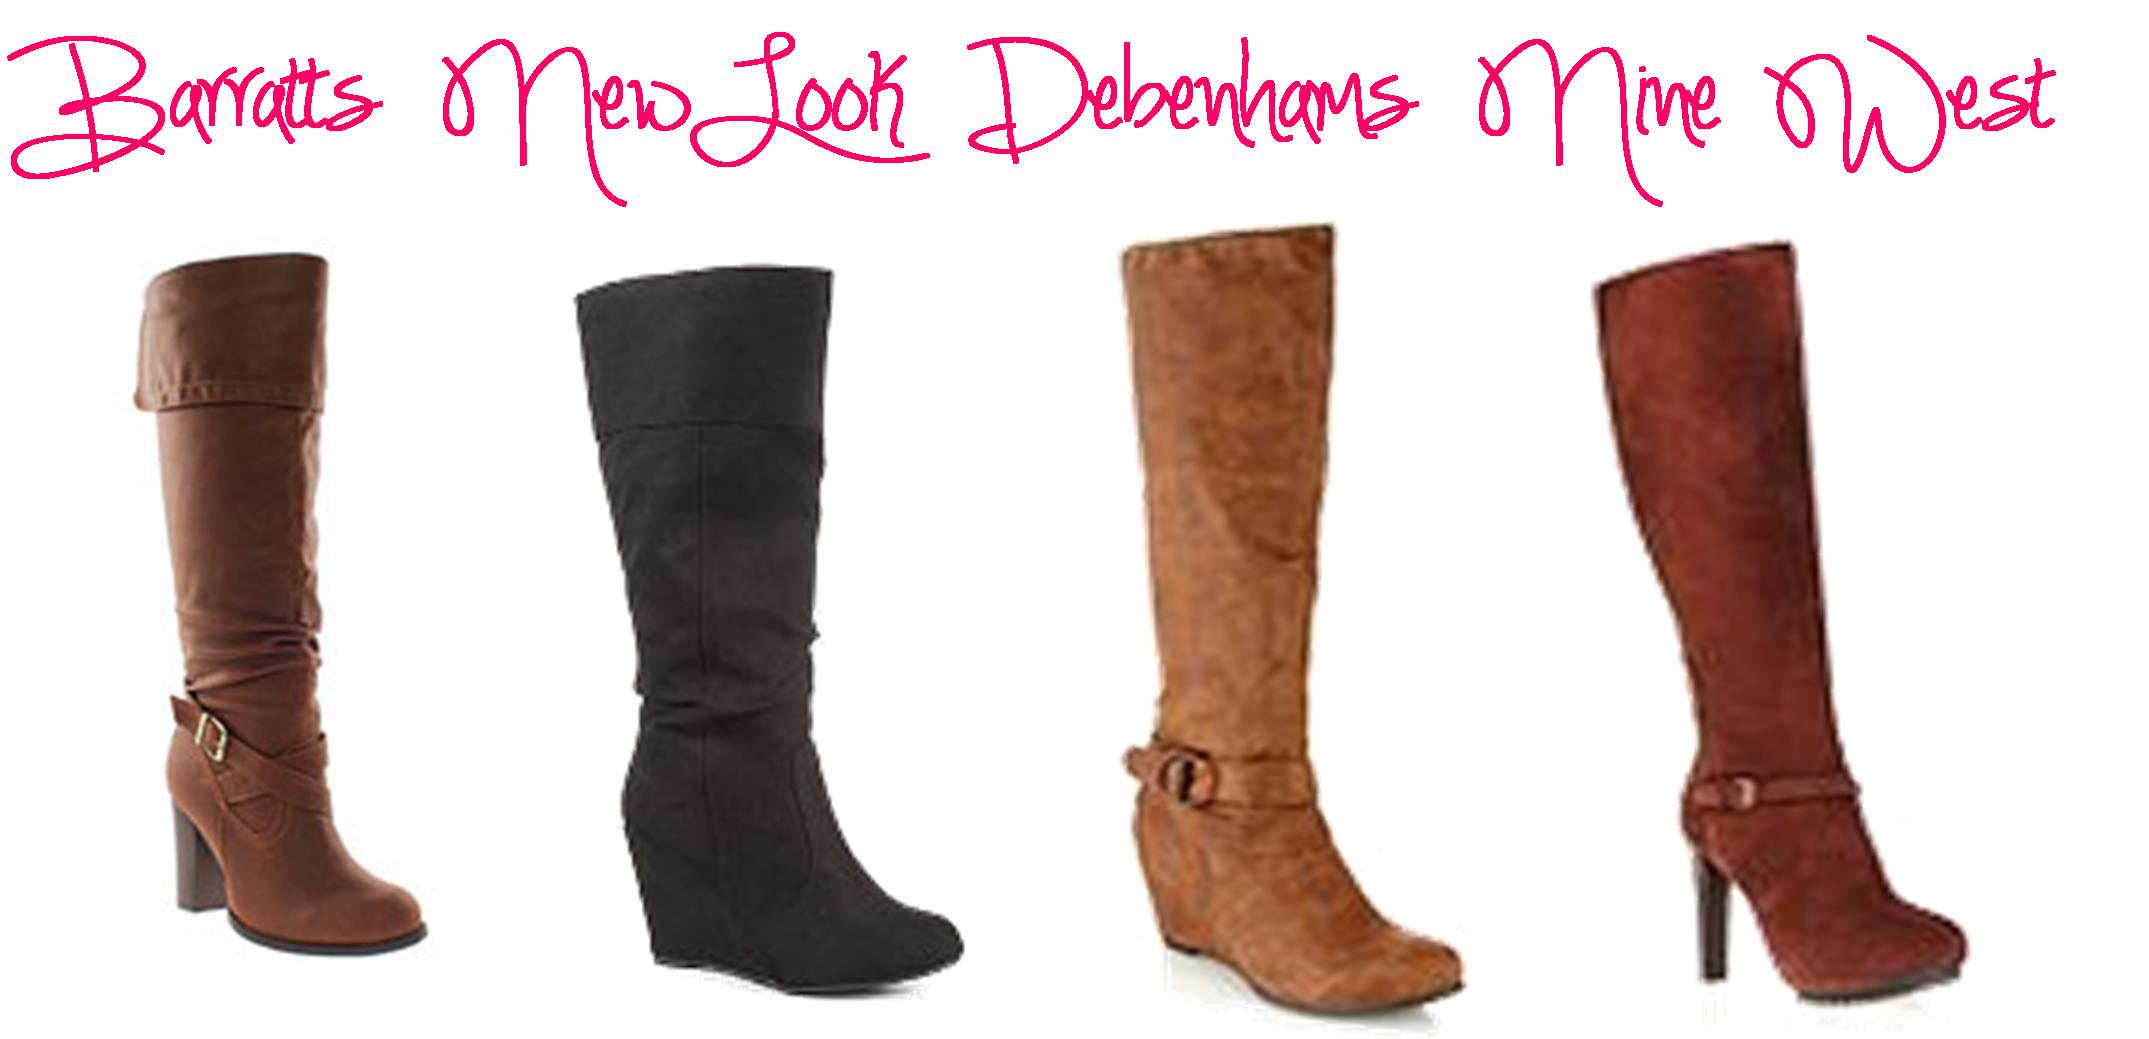 tuesday shoesday mariah carey boots in january sales 2013